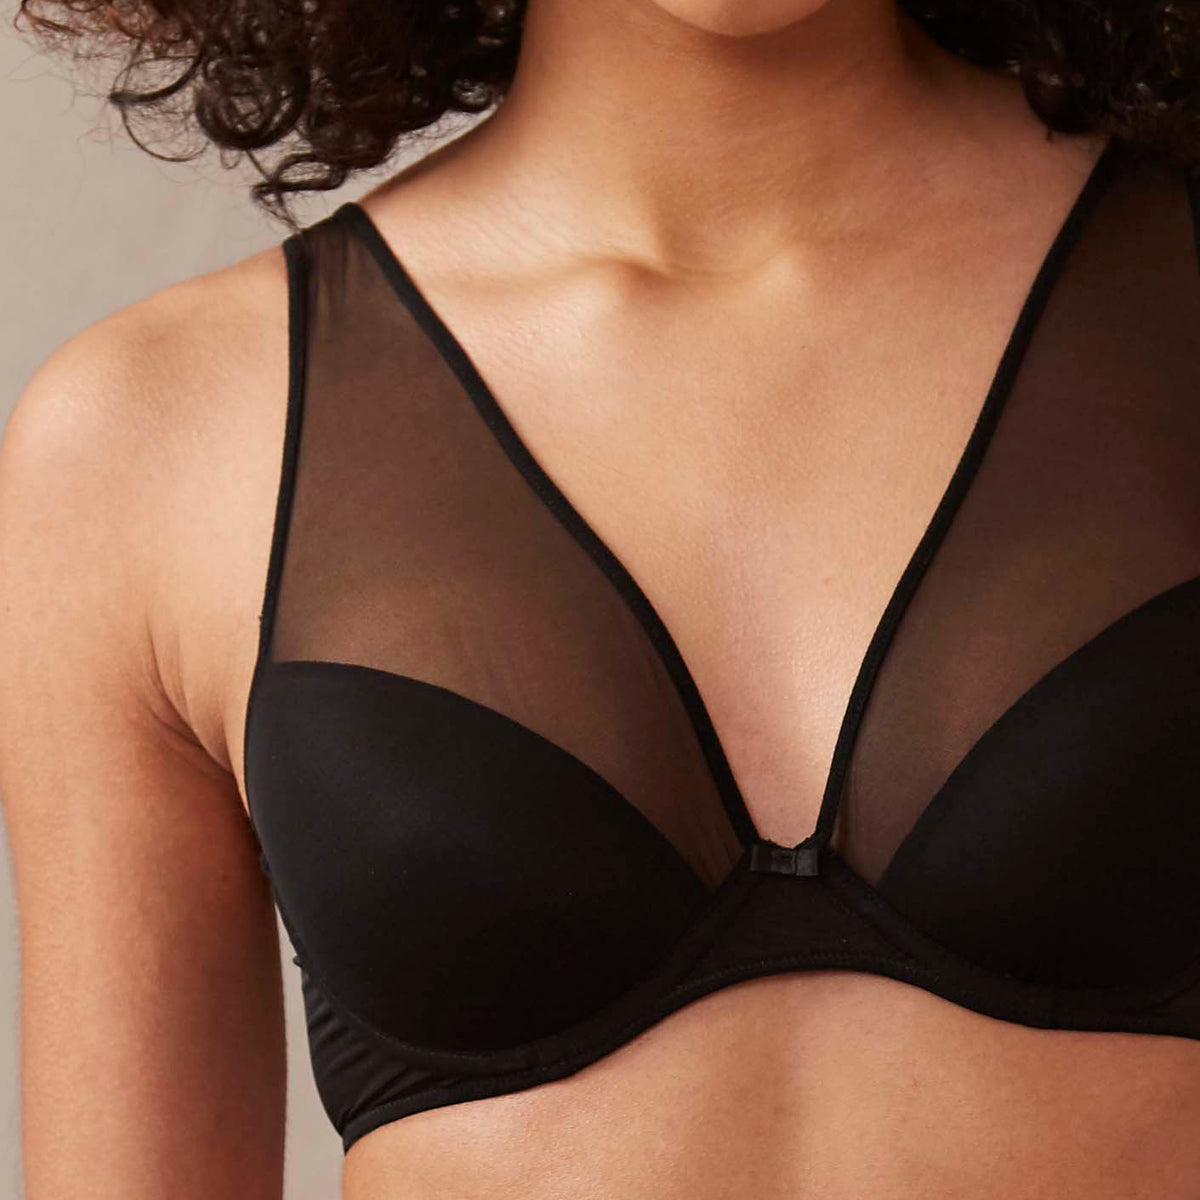 Shop Camille Women's Bras up to 50% Off